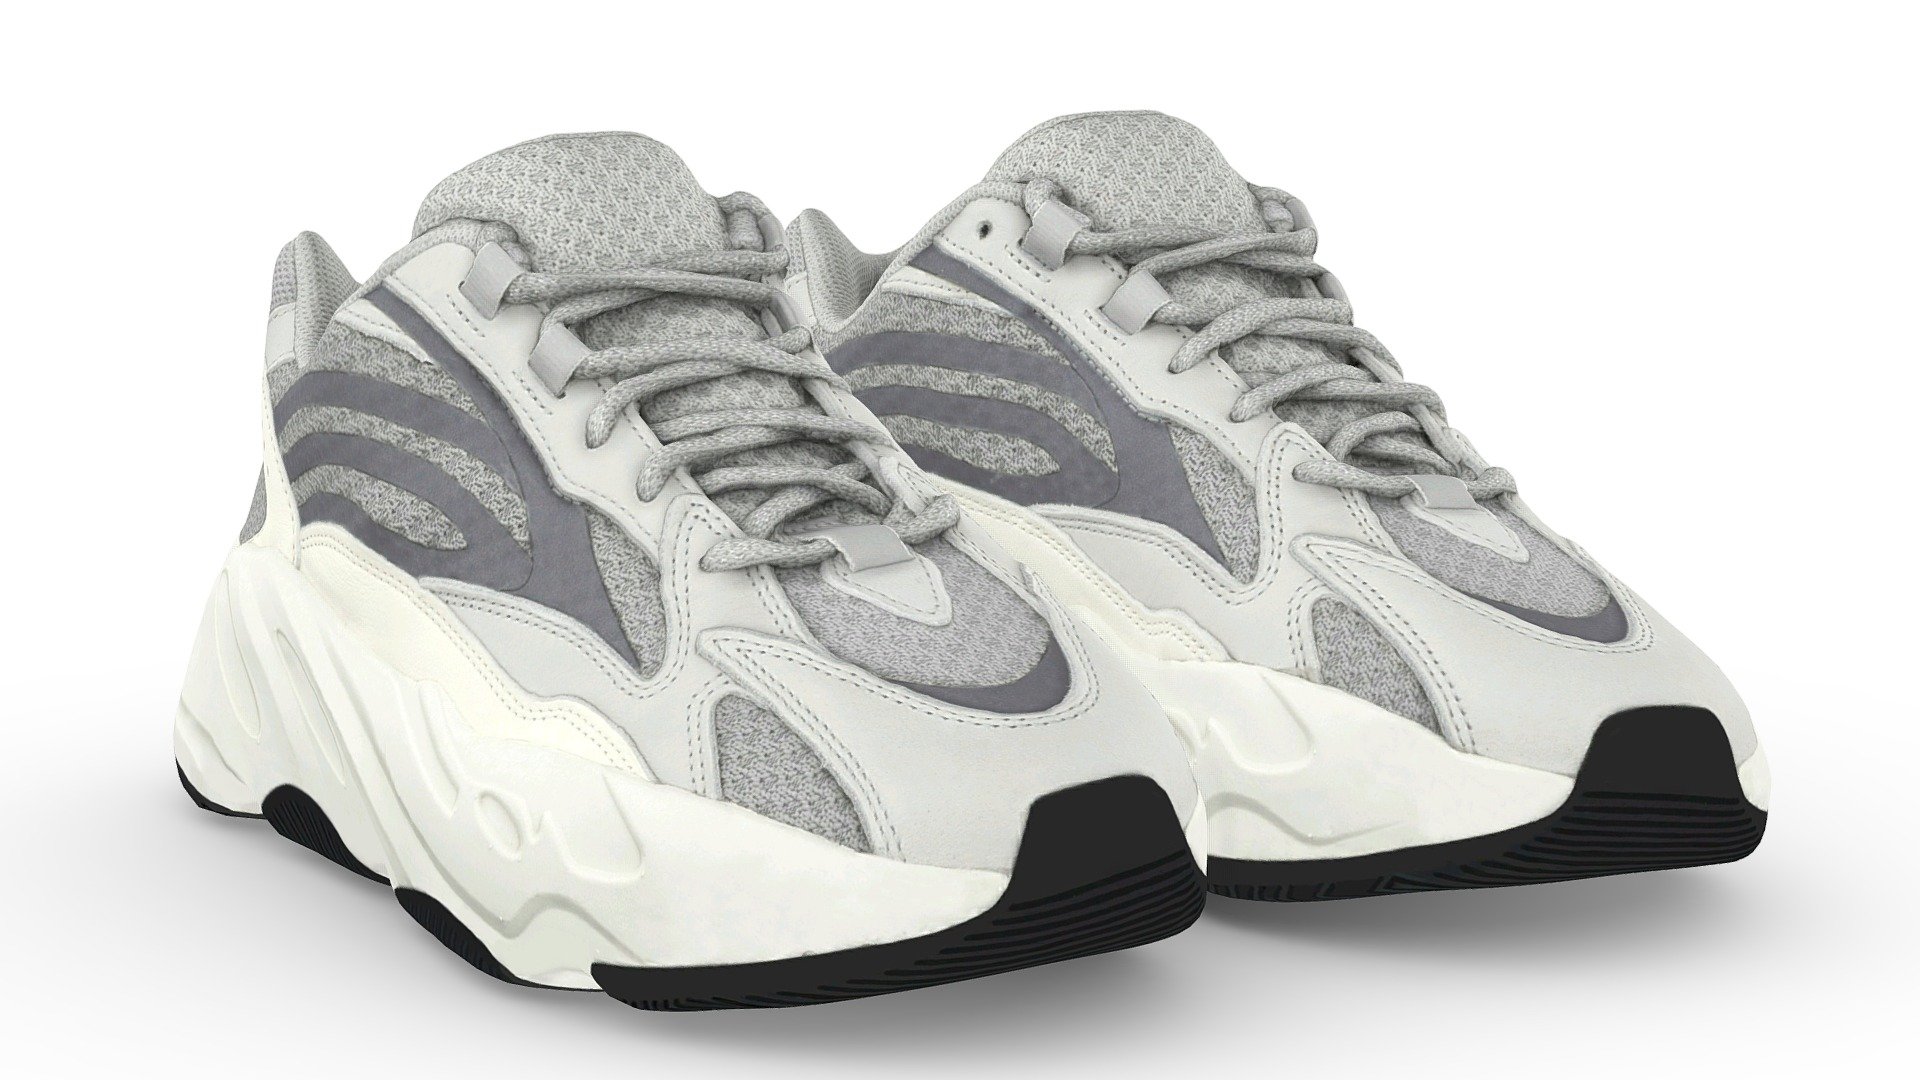 A Very Detailed shoes with High-Quality .

The Mesh is UV unwrapped.

4096x4096 Texture Maps jpg，in the compressed file rar.

The textures is lighting baked,the texture is uploaded to preview images.

File Formats :

FBX .OBJ .stl.collada(dae).Maya2019,Texture(jpg format).

If you want to modify the color of the shoes, it is easy to do with photopshop. 

This is a professional scanning agency, if there are any shoes that are not included, please let me know.It will helps a lot.By the way,we are available for custom shoes scan.

Don't forget to check my other sneakers,Have a nice day：） - Adidas Yeezy Boost Runner 700 V2 Static - Buy Royalty Free 3D model by Vincent Page (@vincentpage) 3d model